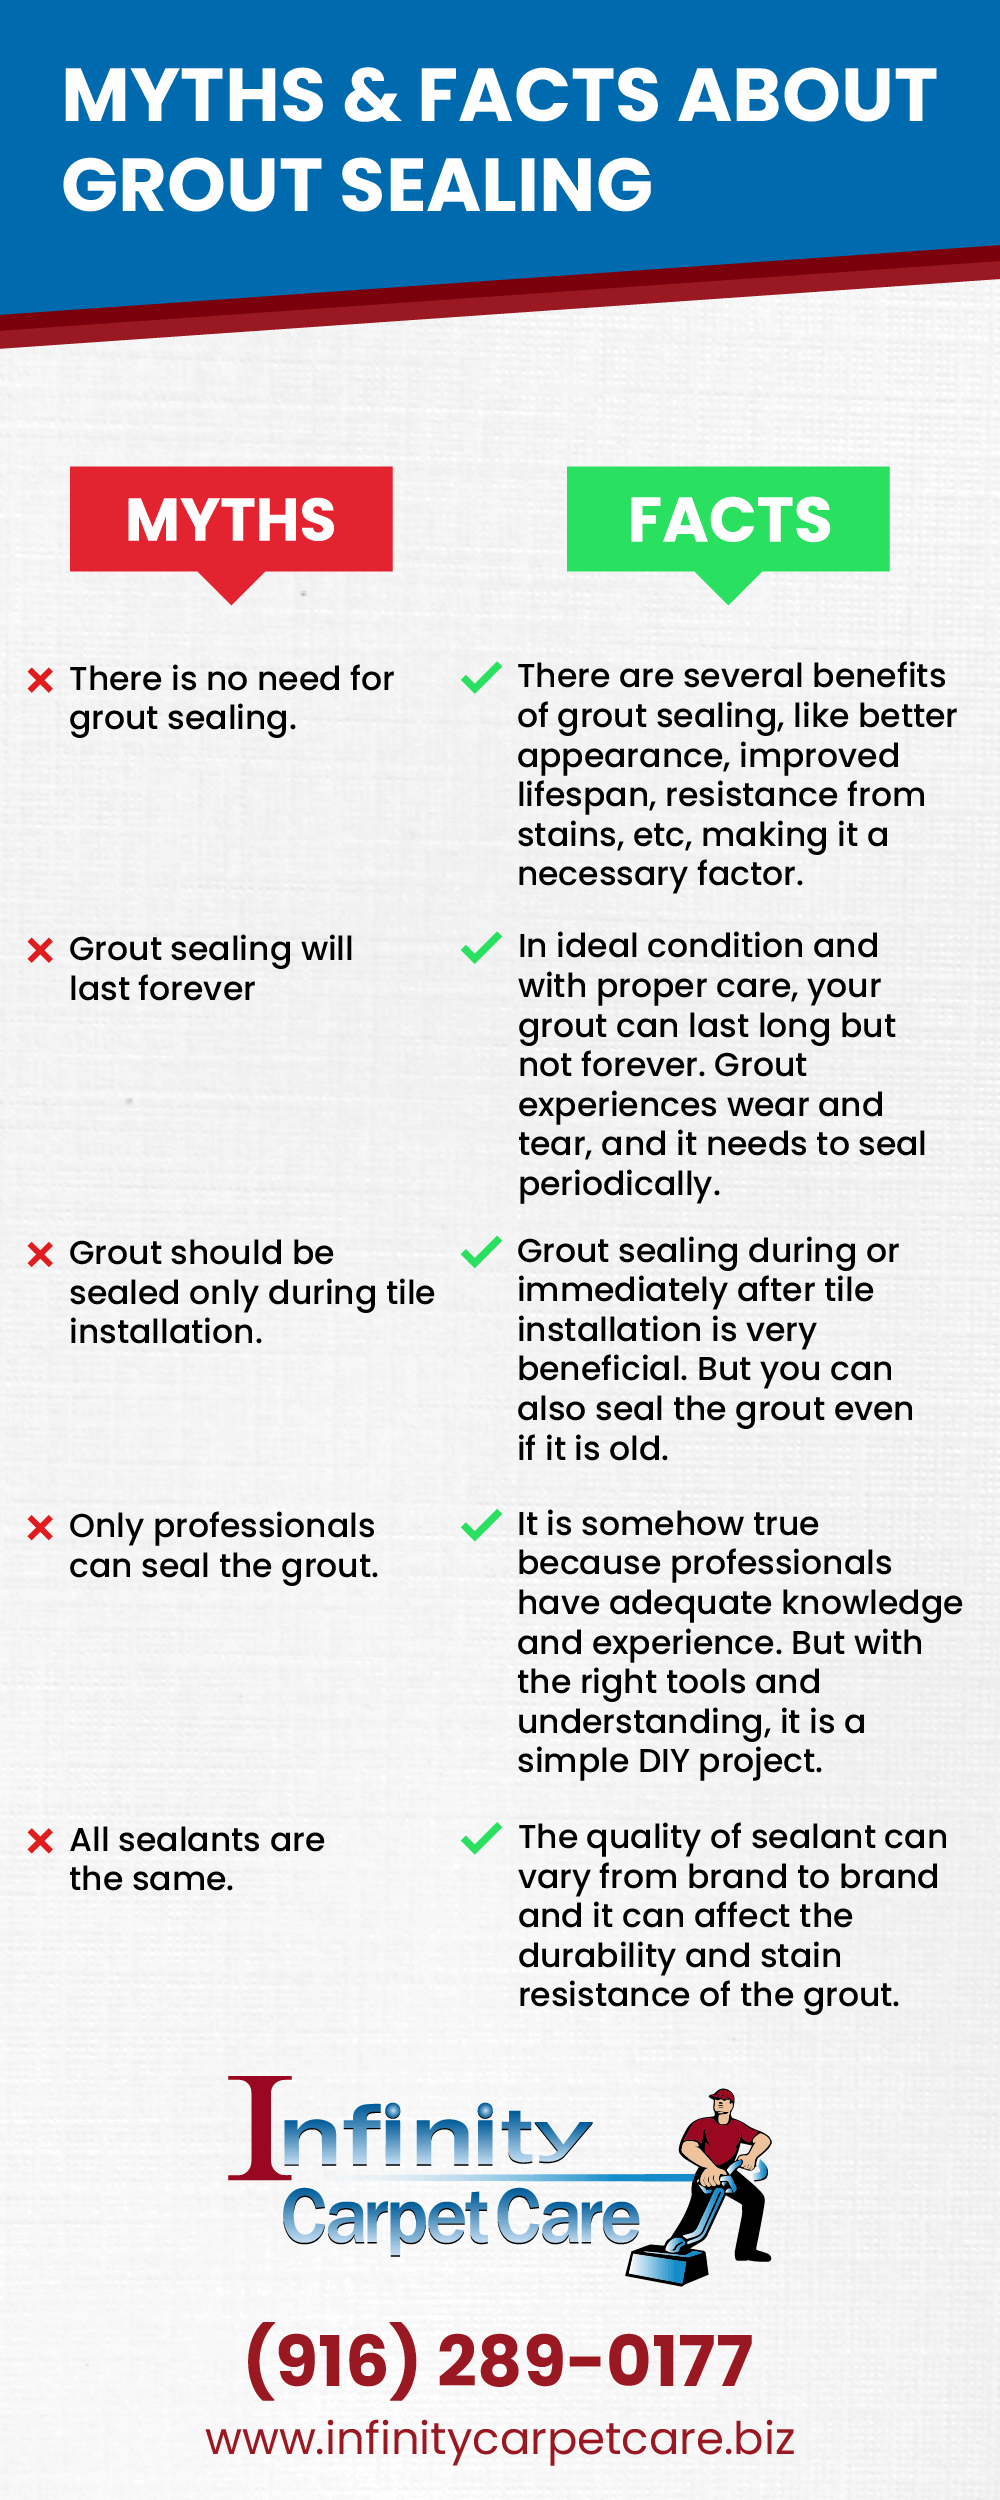 Myths and Facts About Grout Sealing